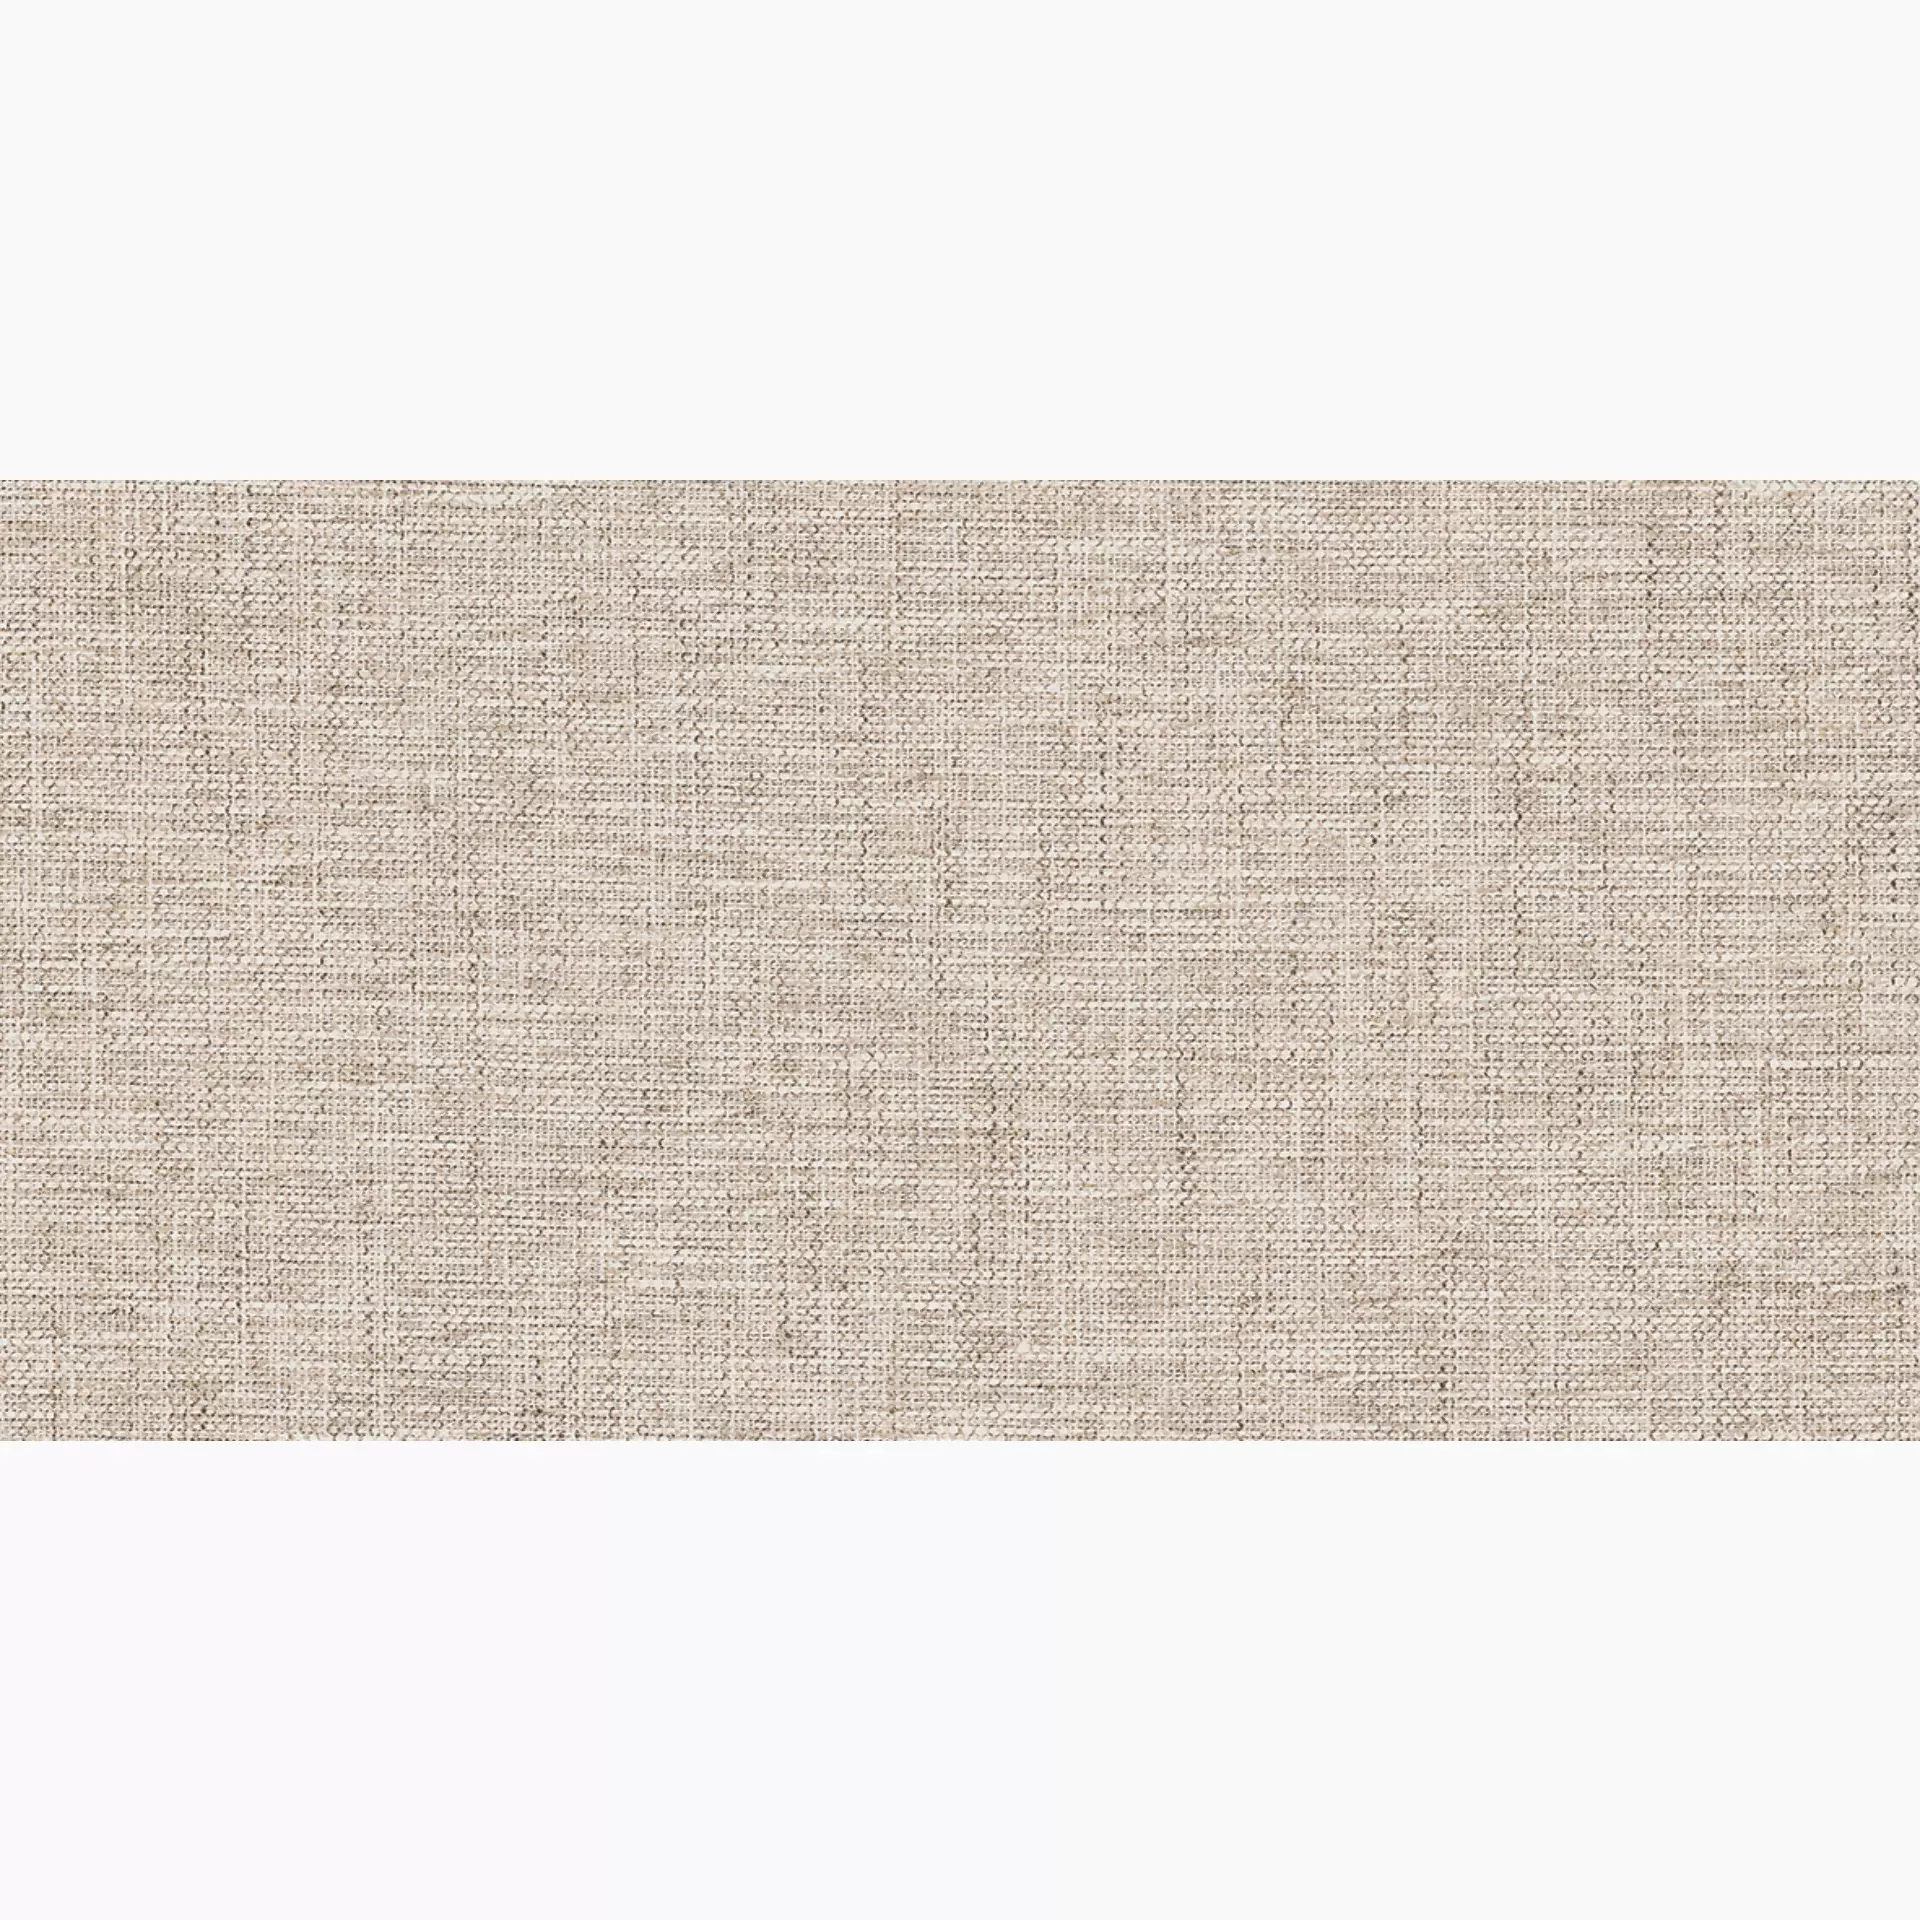 Sant Agostino Fineart Sand Natural CSAFISA130 30x60cm rectified 10mm